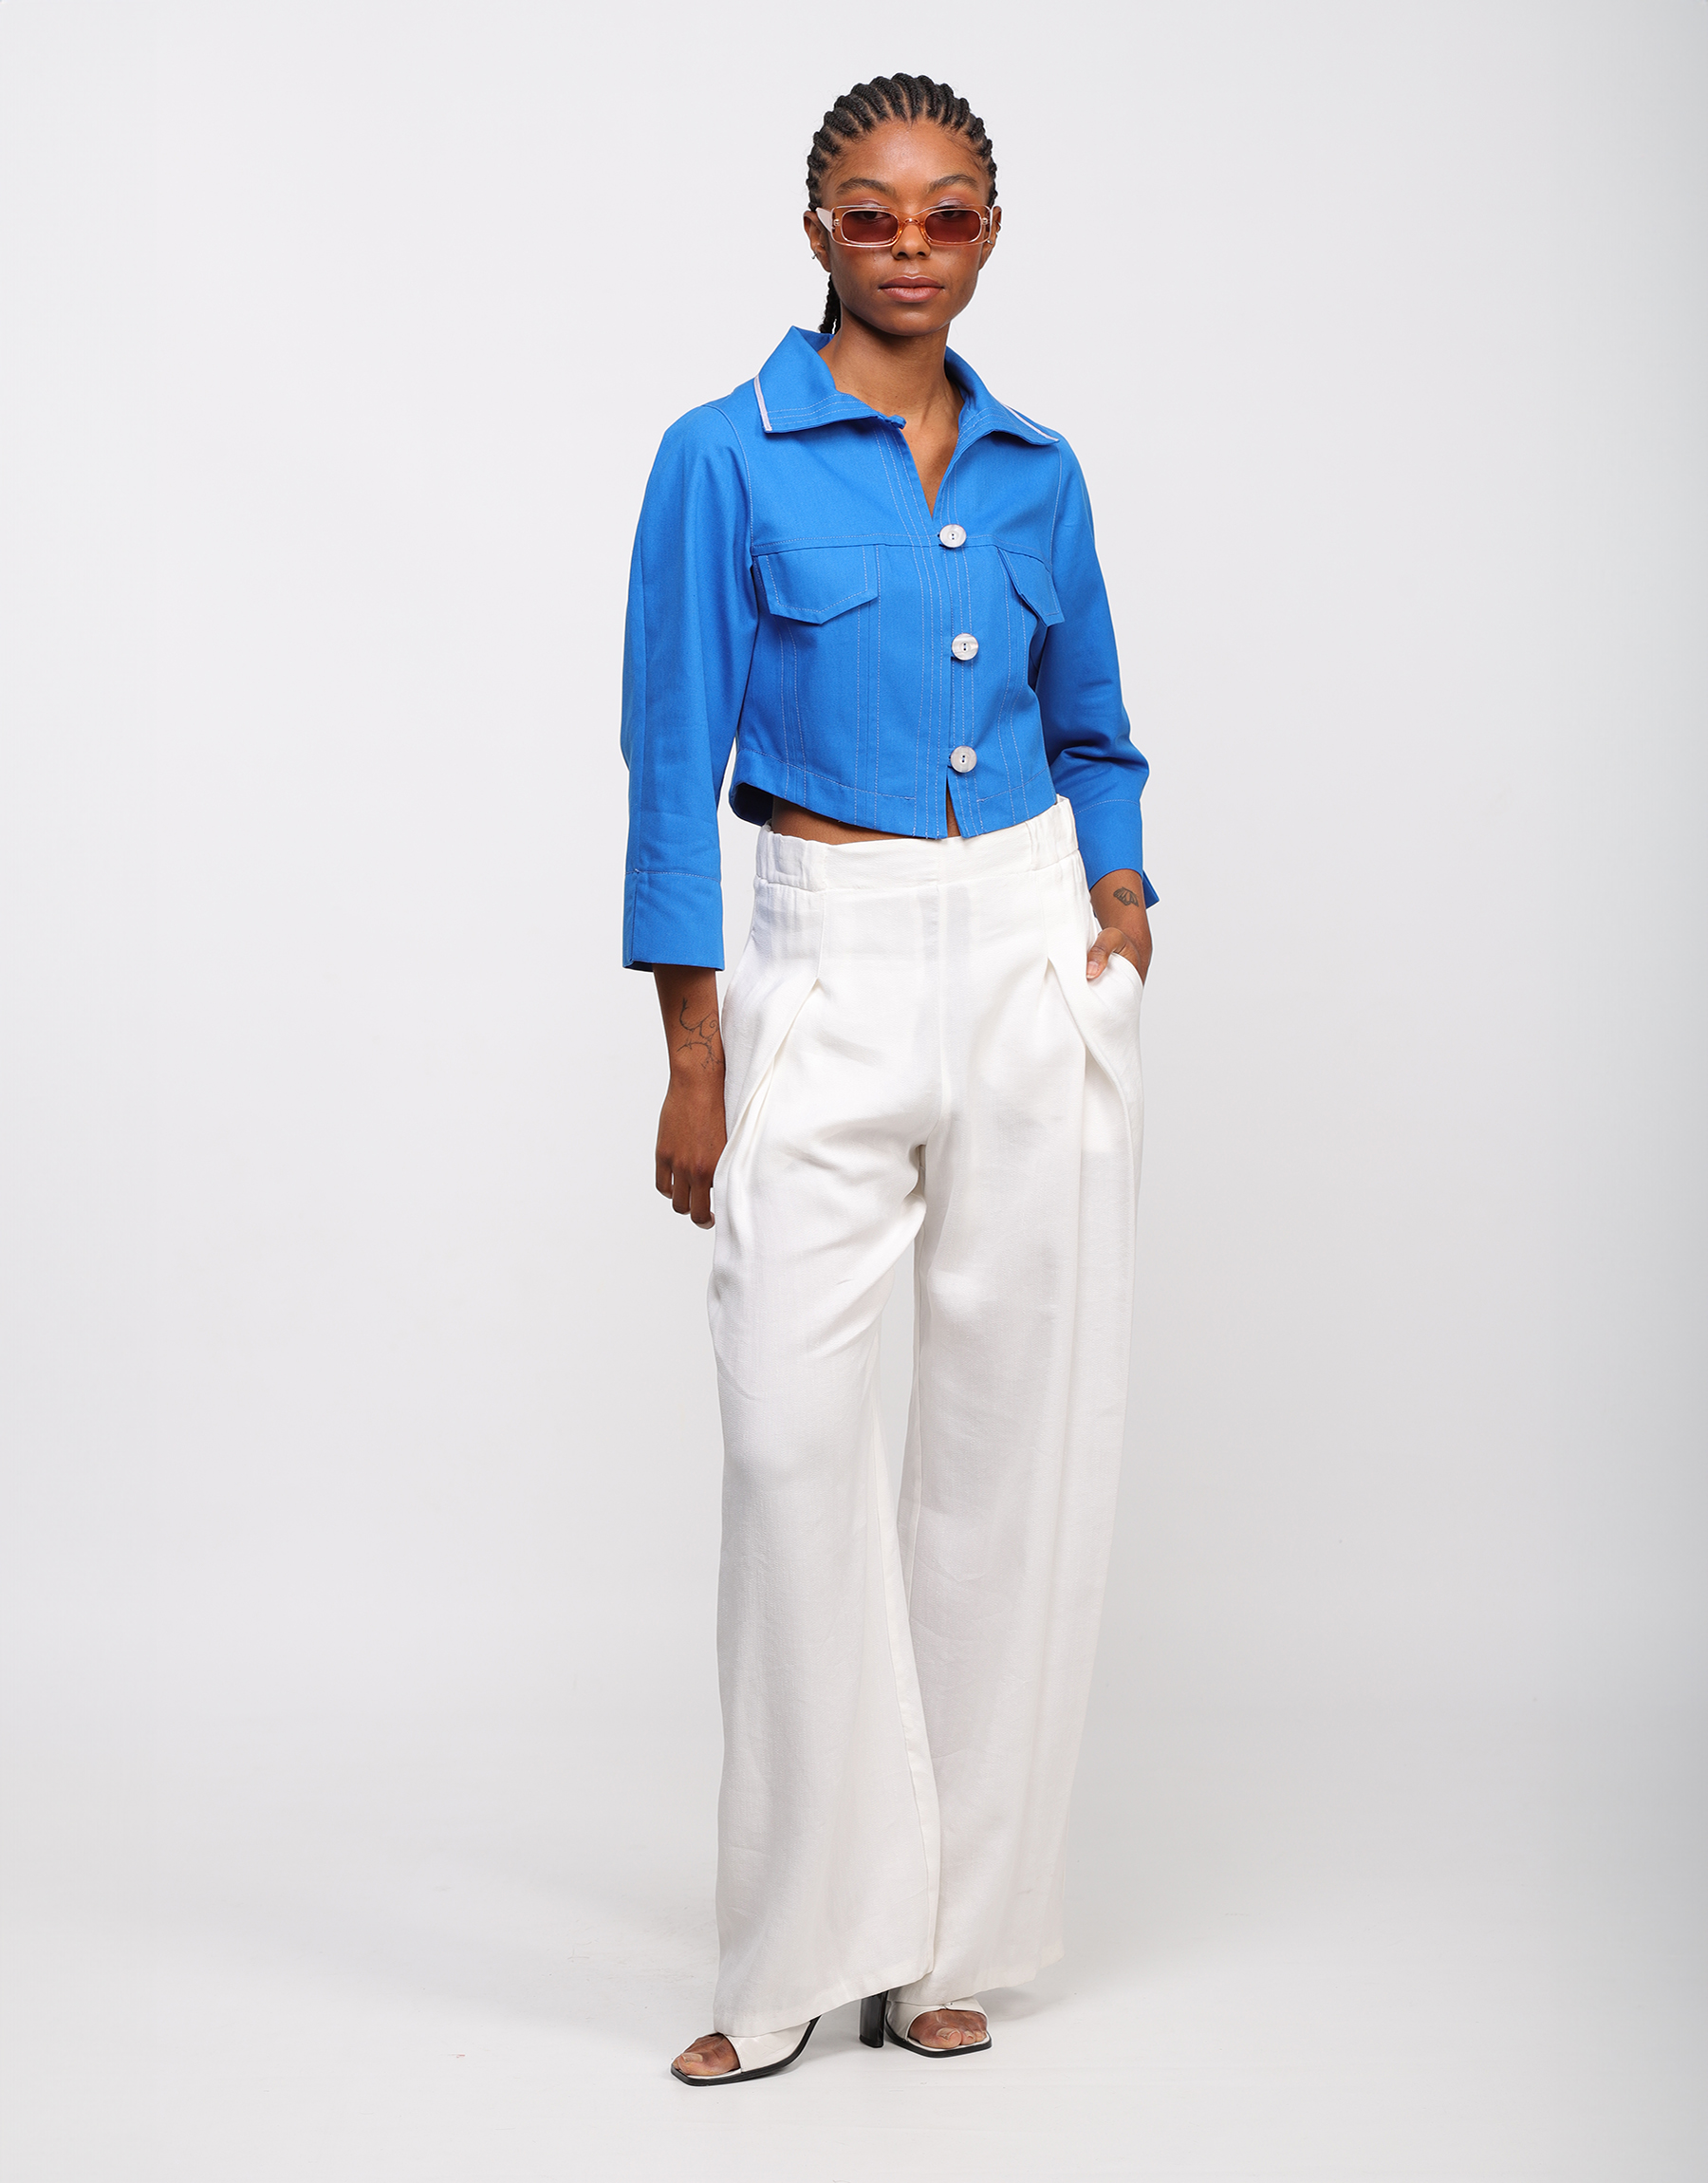 Short fitted jacket stitched chic casual in ivory crepe or royal blue canvas